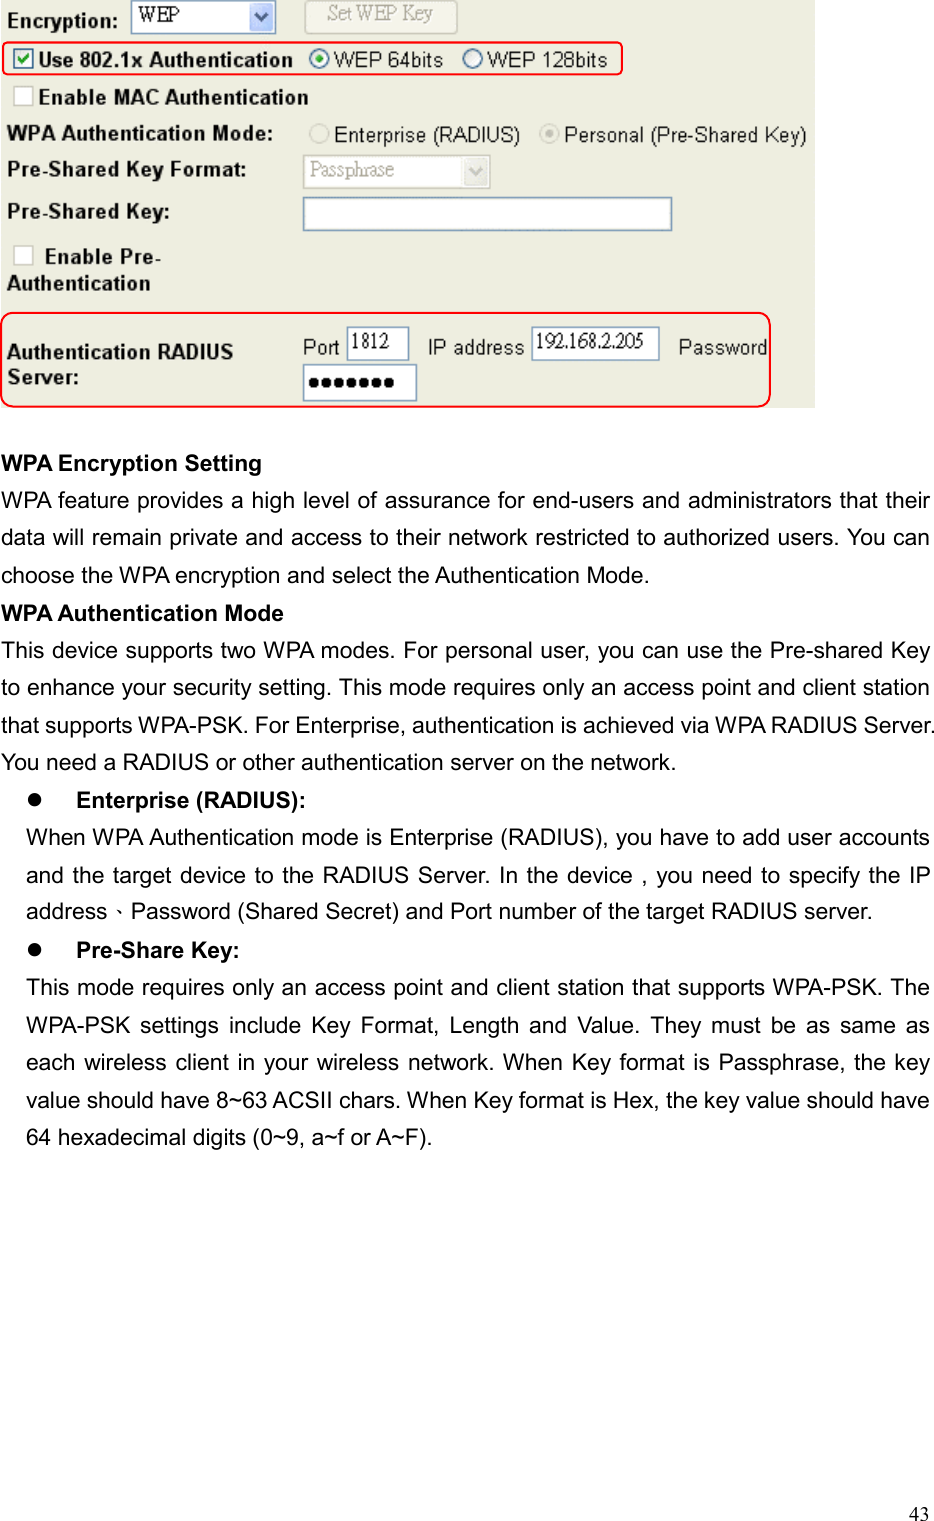  43 WPA Encryption Setting WPA feature provides a high level of assurance for end-users and administrators that their data will remain private and access to their network restricted to authorized users. You can choose the WPA encryption and select the Authentication Mode. WPA Authentication Mode This device supports two WPA modes. For personal user, you can use the Pre-shared Key to enhance your security setting. This mode requires only an access point and client station that supports WPA-PSK. For Enterprise, authentication is achieved via WPA RADIUS Server. You need a RADIUS or other authentication server on the network.   Enterprise (RADIUS): When WPA Authentication mode is Enterprise (RADIUS), you have to add user accounts and the target device to the RADIUS Server. In the device , you need to specify the IP address、Password (Shared Secret) and Port number of the target RADIUS server.   Pre-Share Key: This mode requires only an access point and client station that supports WPA-PSK. The WPA-PSK settings include Key Format, Length and Value. They must be as same as each wireless client in your wireless network. When Key format is Passphrase, the key value should have 8~63 ACSII chars. When Key format is Hex, the key value should have 64 hexadecimal digits (0~9, a~f or A~F).   